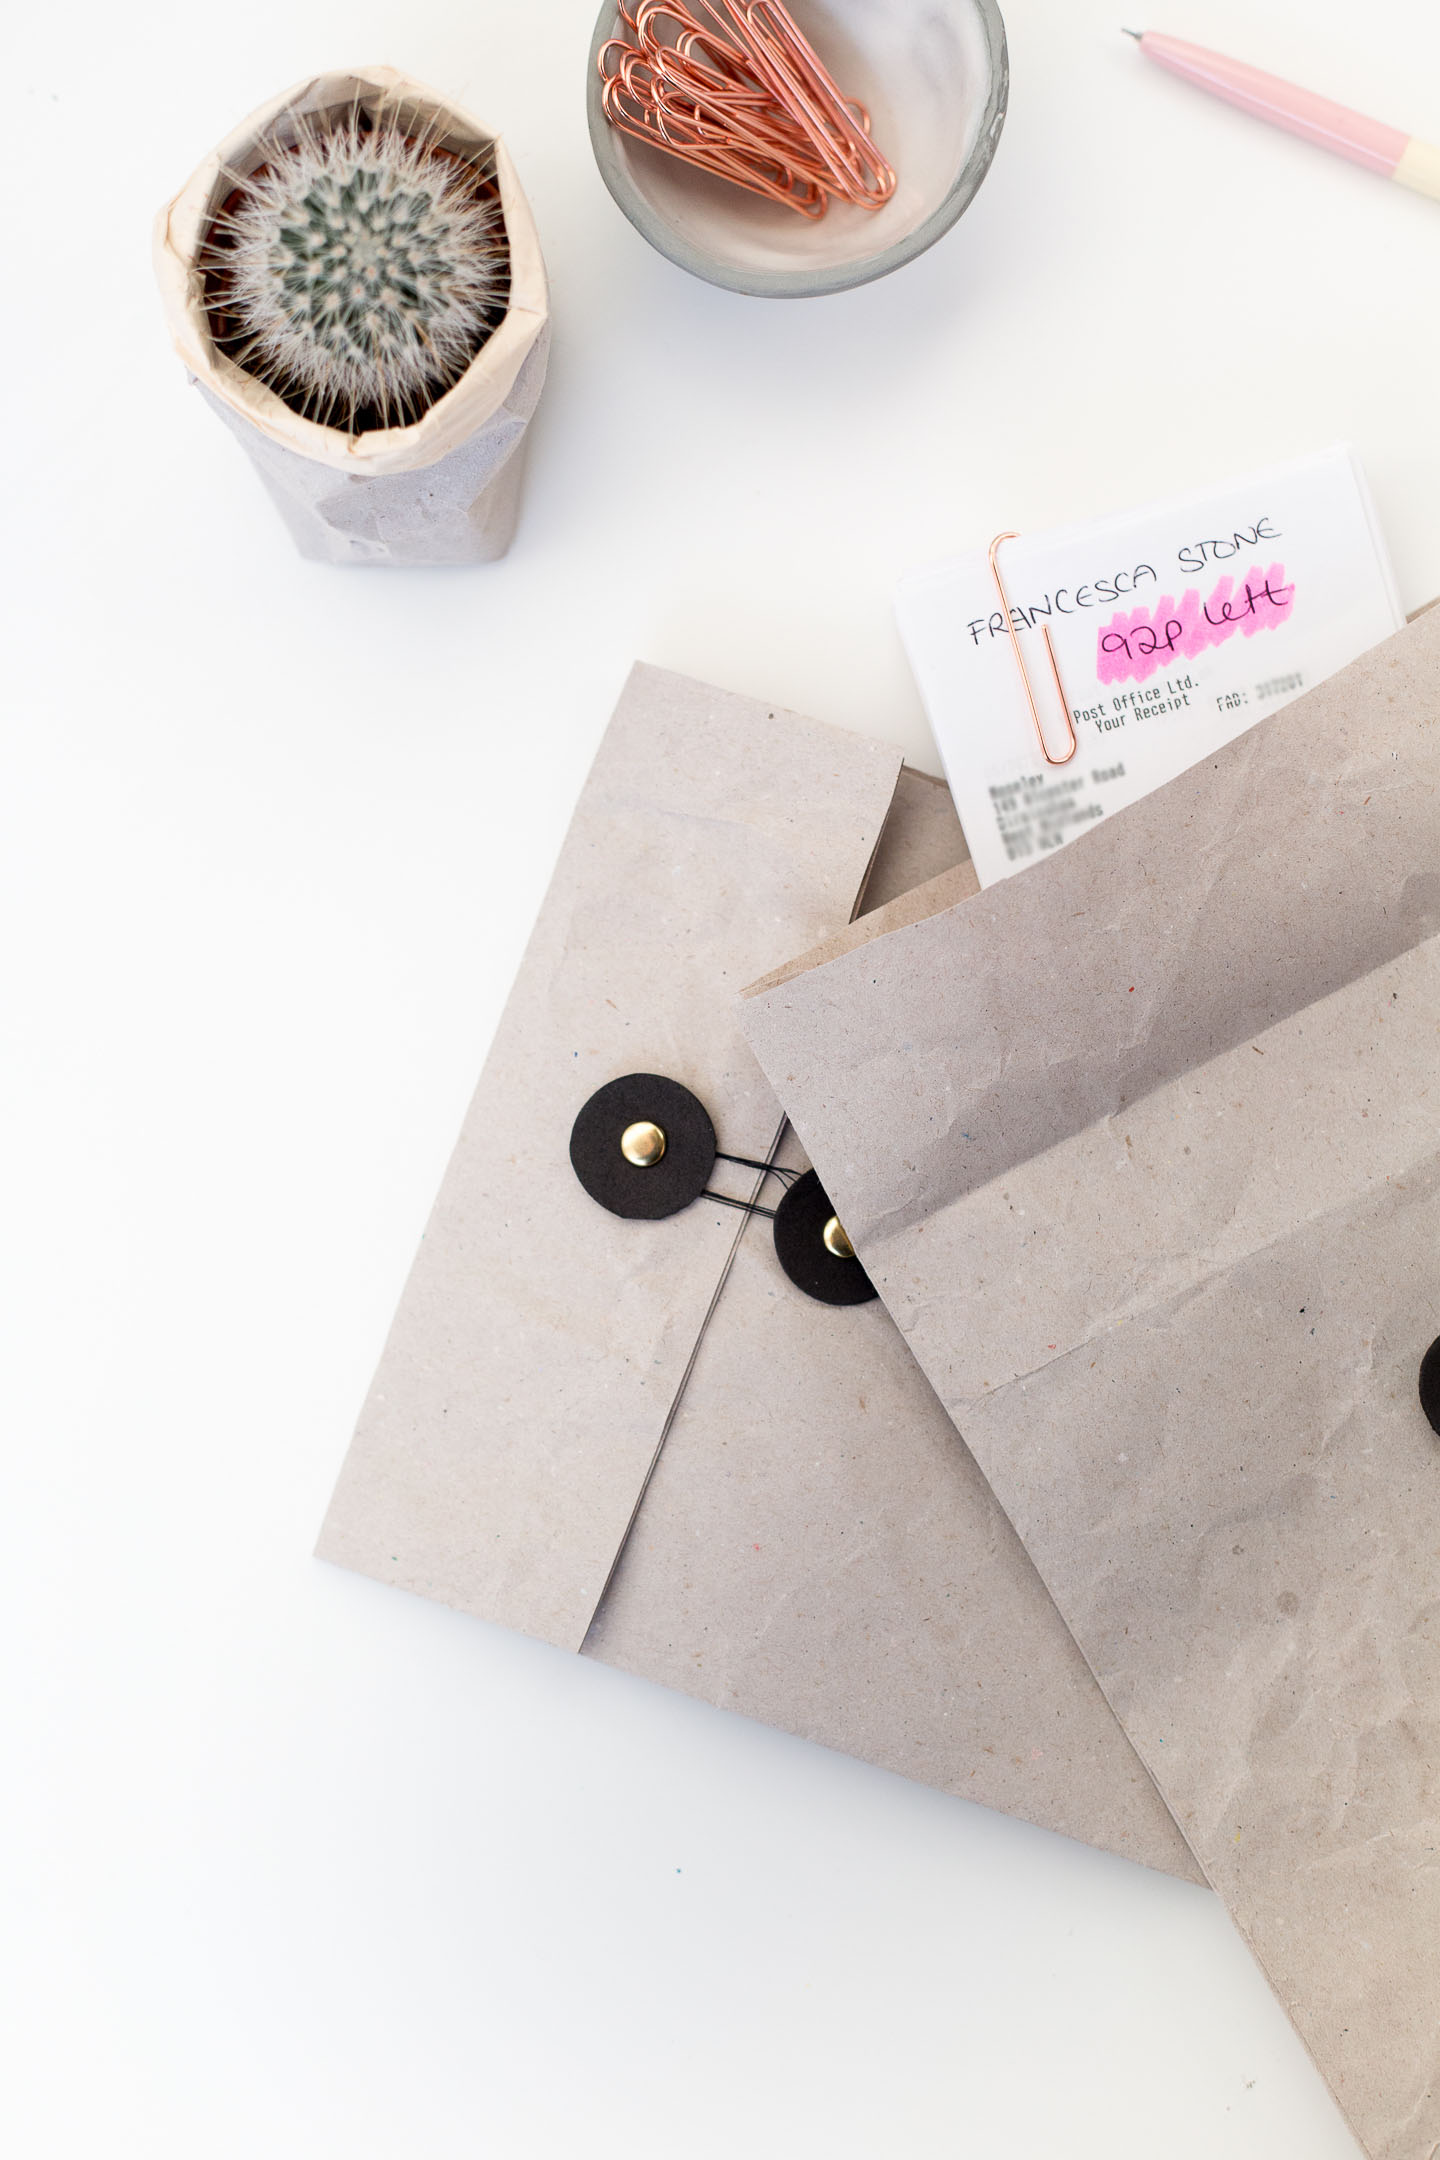 DIY Document Envelopes – Organise your Receipts, Invoices and Bills